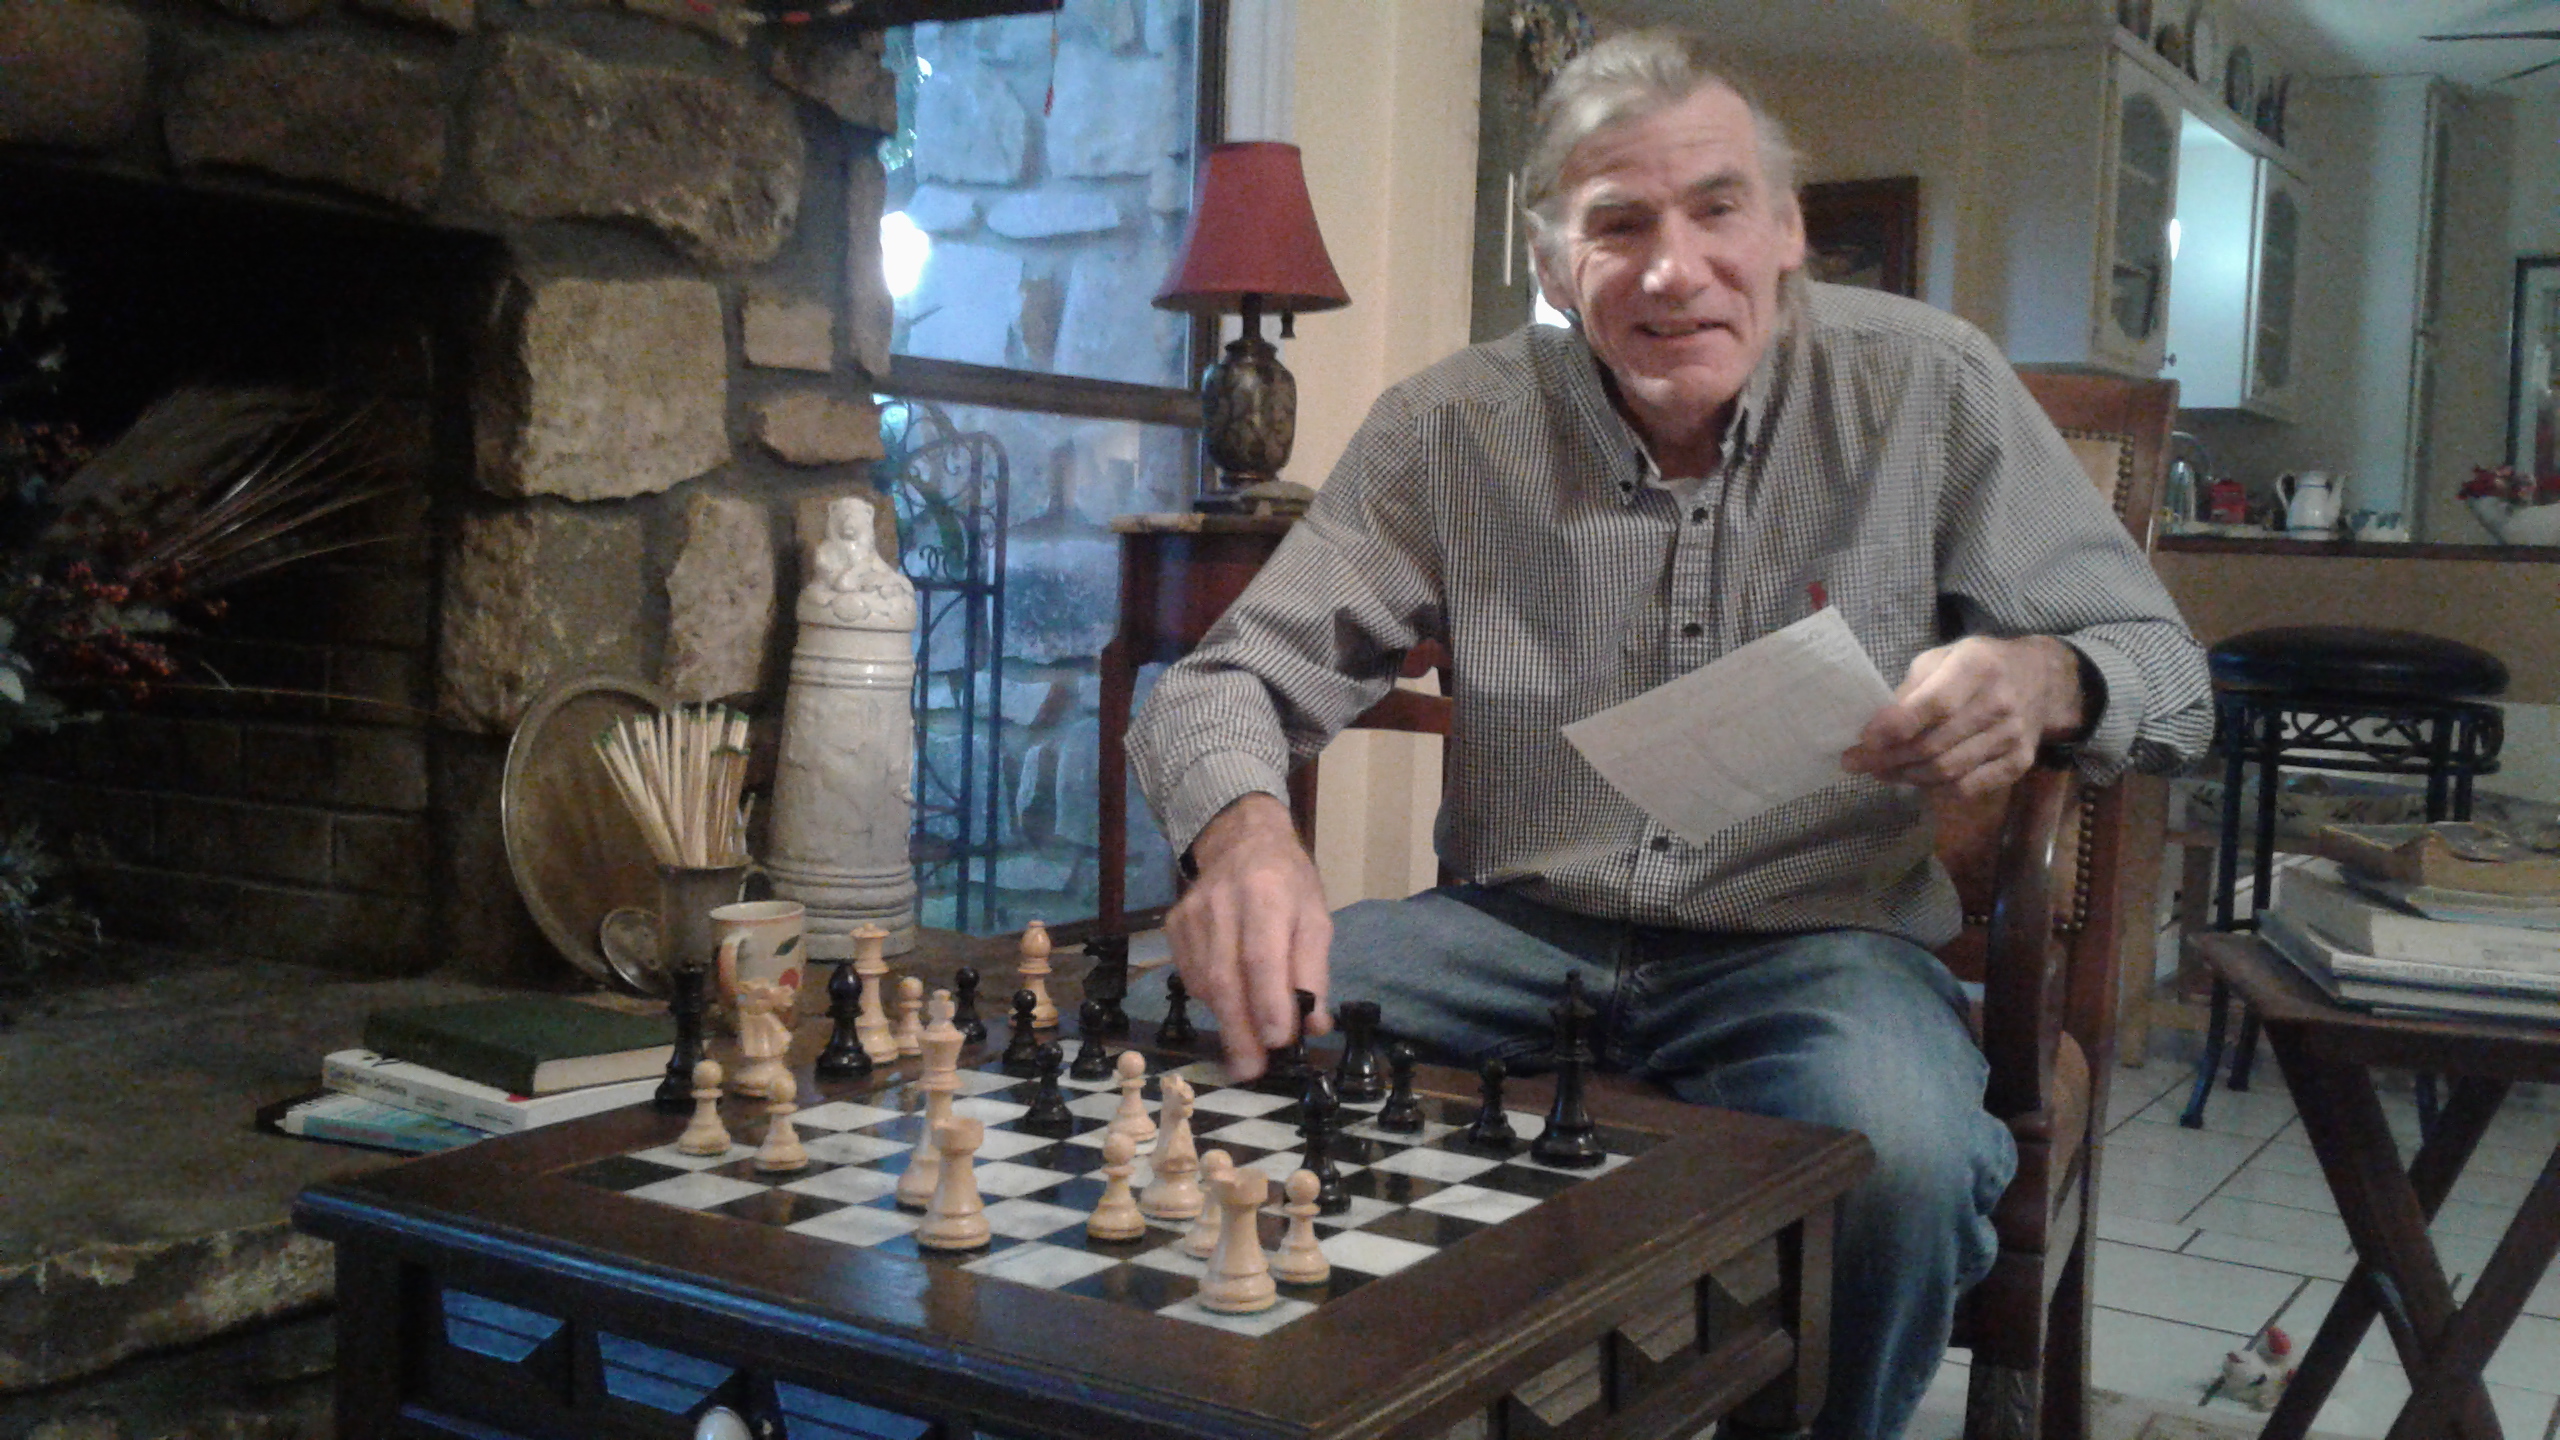 RUSS HEISE IS RANKED IN THE 93RD PERCENTILE OF ALL TEXAS CHESS PLAYERS - PHOTO BY CAROL HEISE